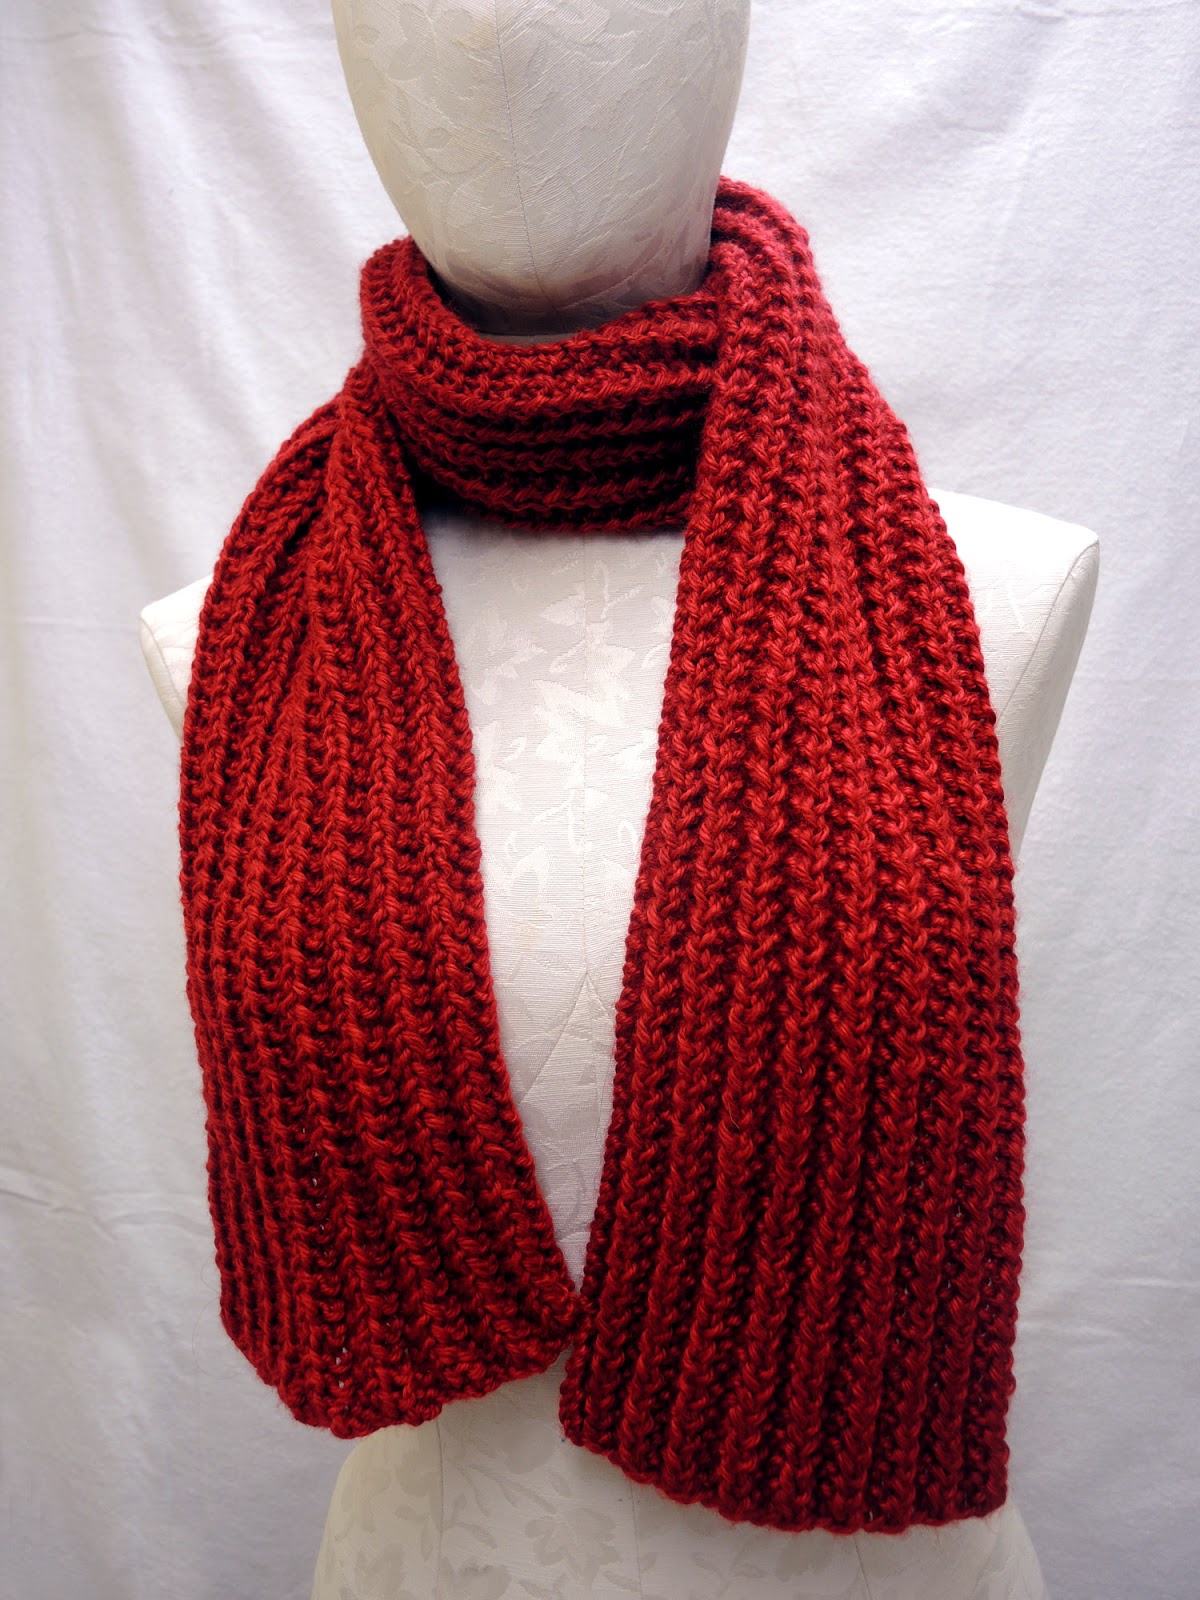 ladynthread: Red Scarf Project - Foster Care to Success